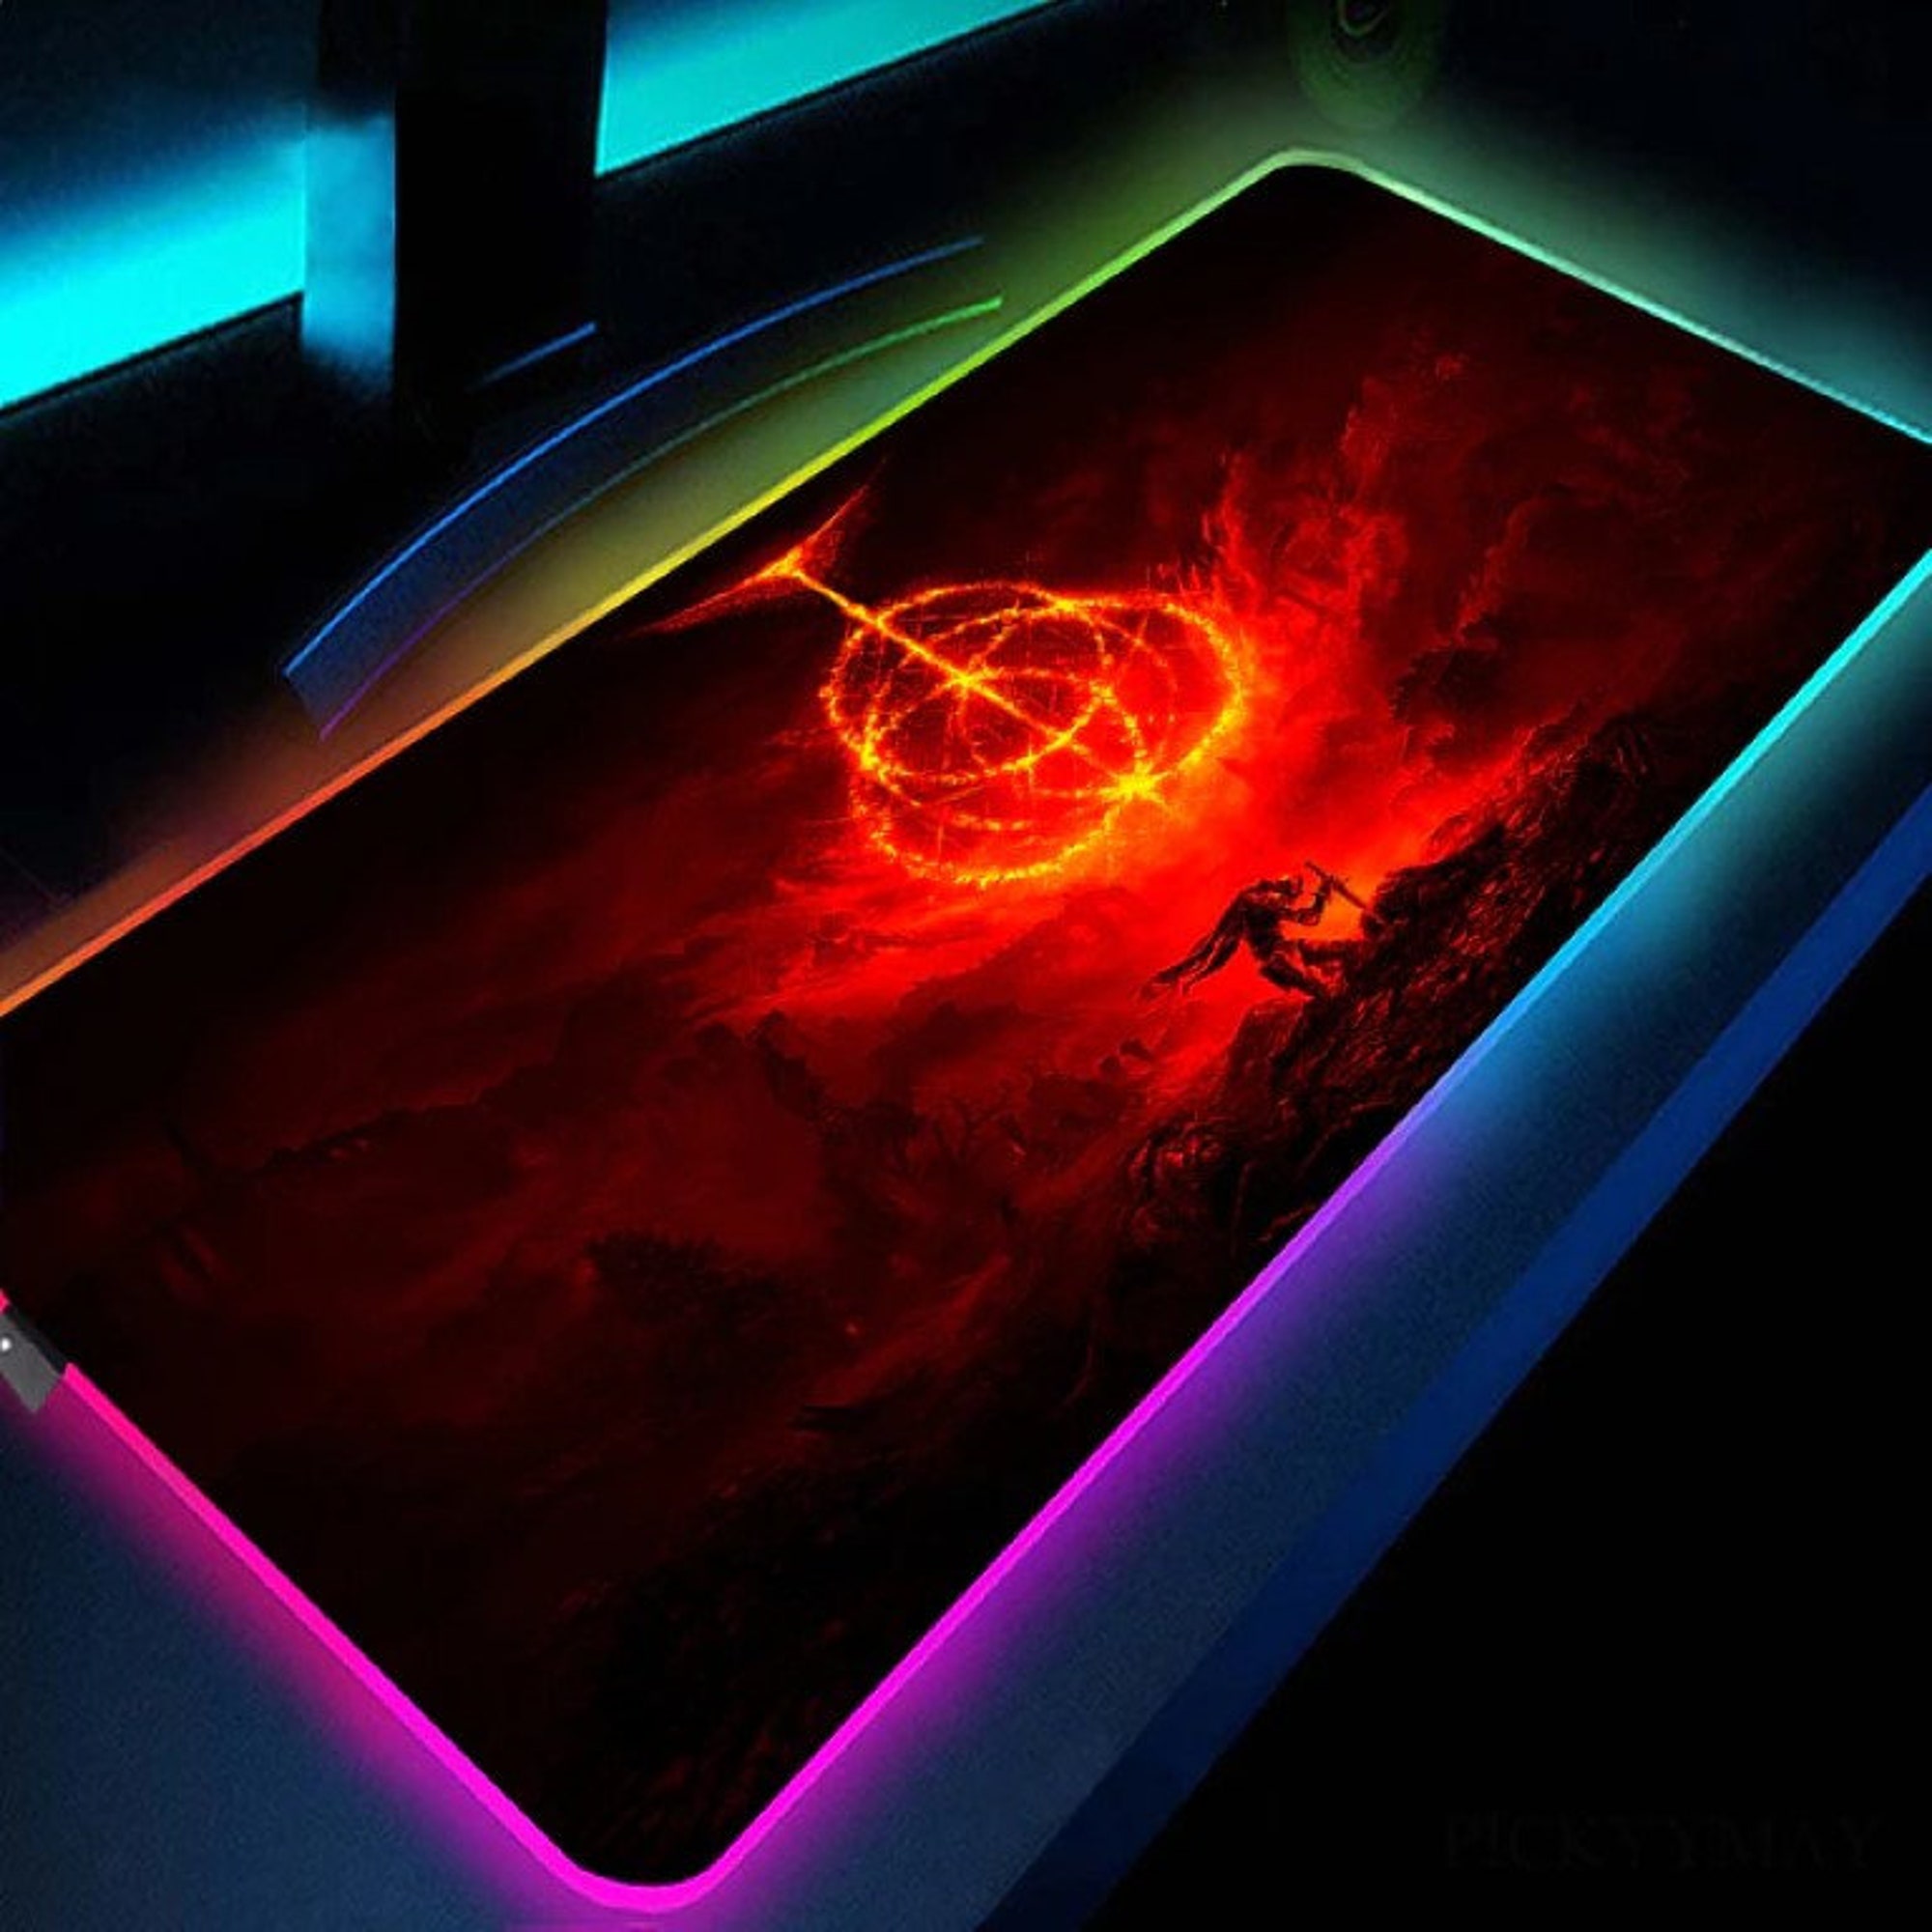 Elden Ring Gaming LED Mouse Pad RGB Backlight Computer Mouse